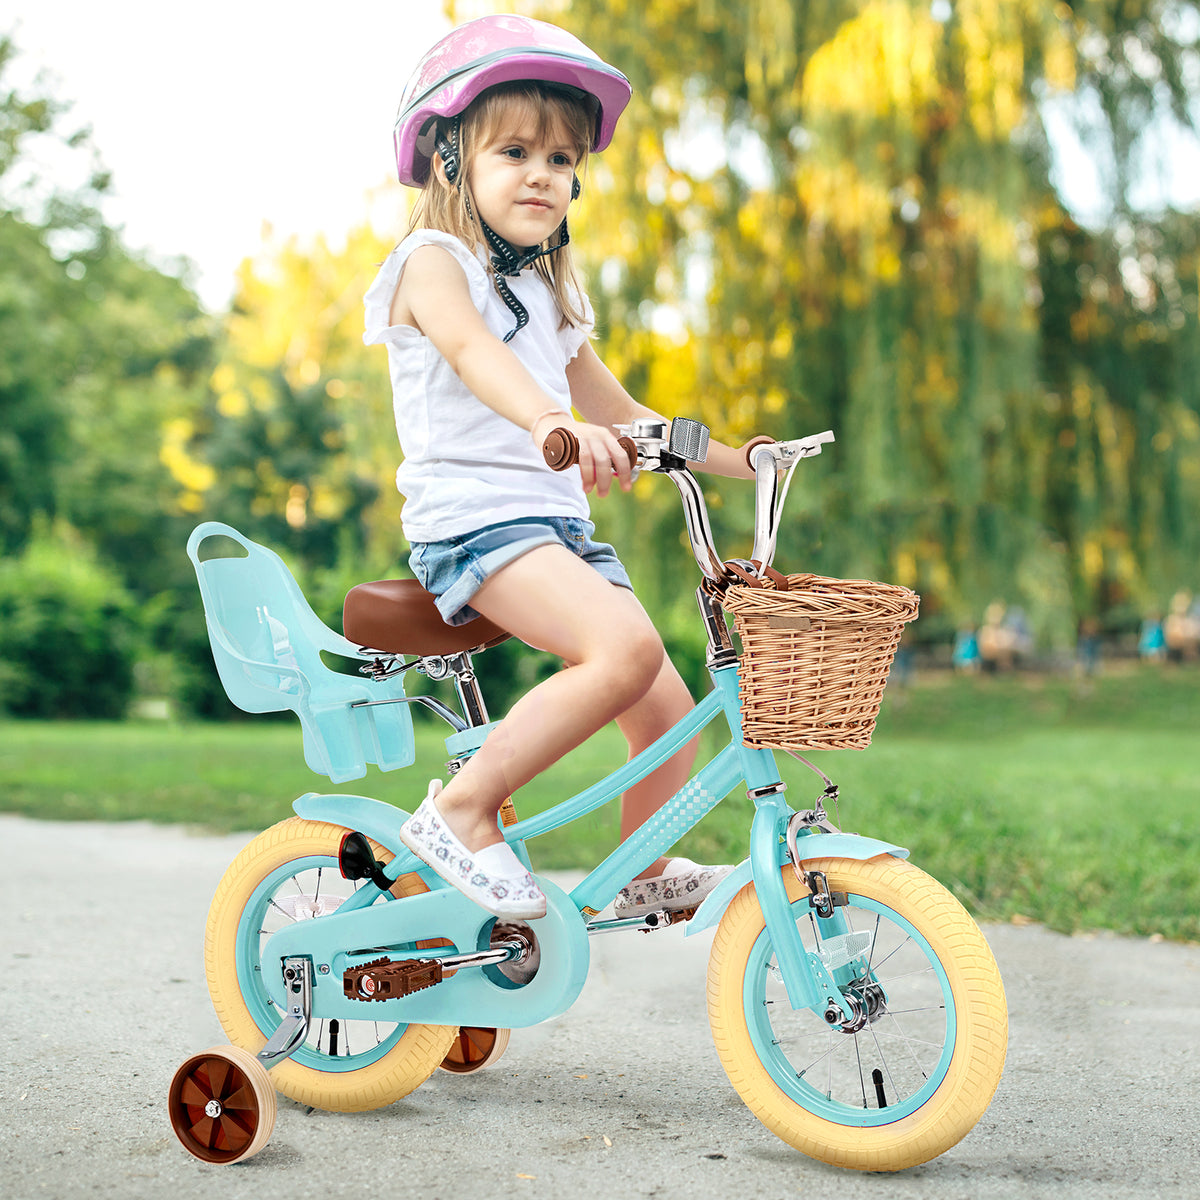 XJD Kids Bicycle for Toddlers and Children 3+ Years Old, 12 14 16 20 inch Bike for Girls and Boys, with Basket and Bell Training Wheels, Adjustable Seat Handlebar Height, Blue